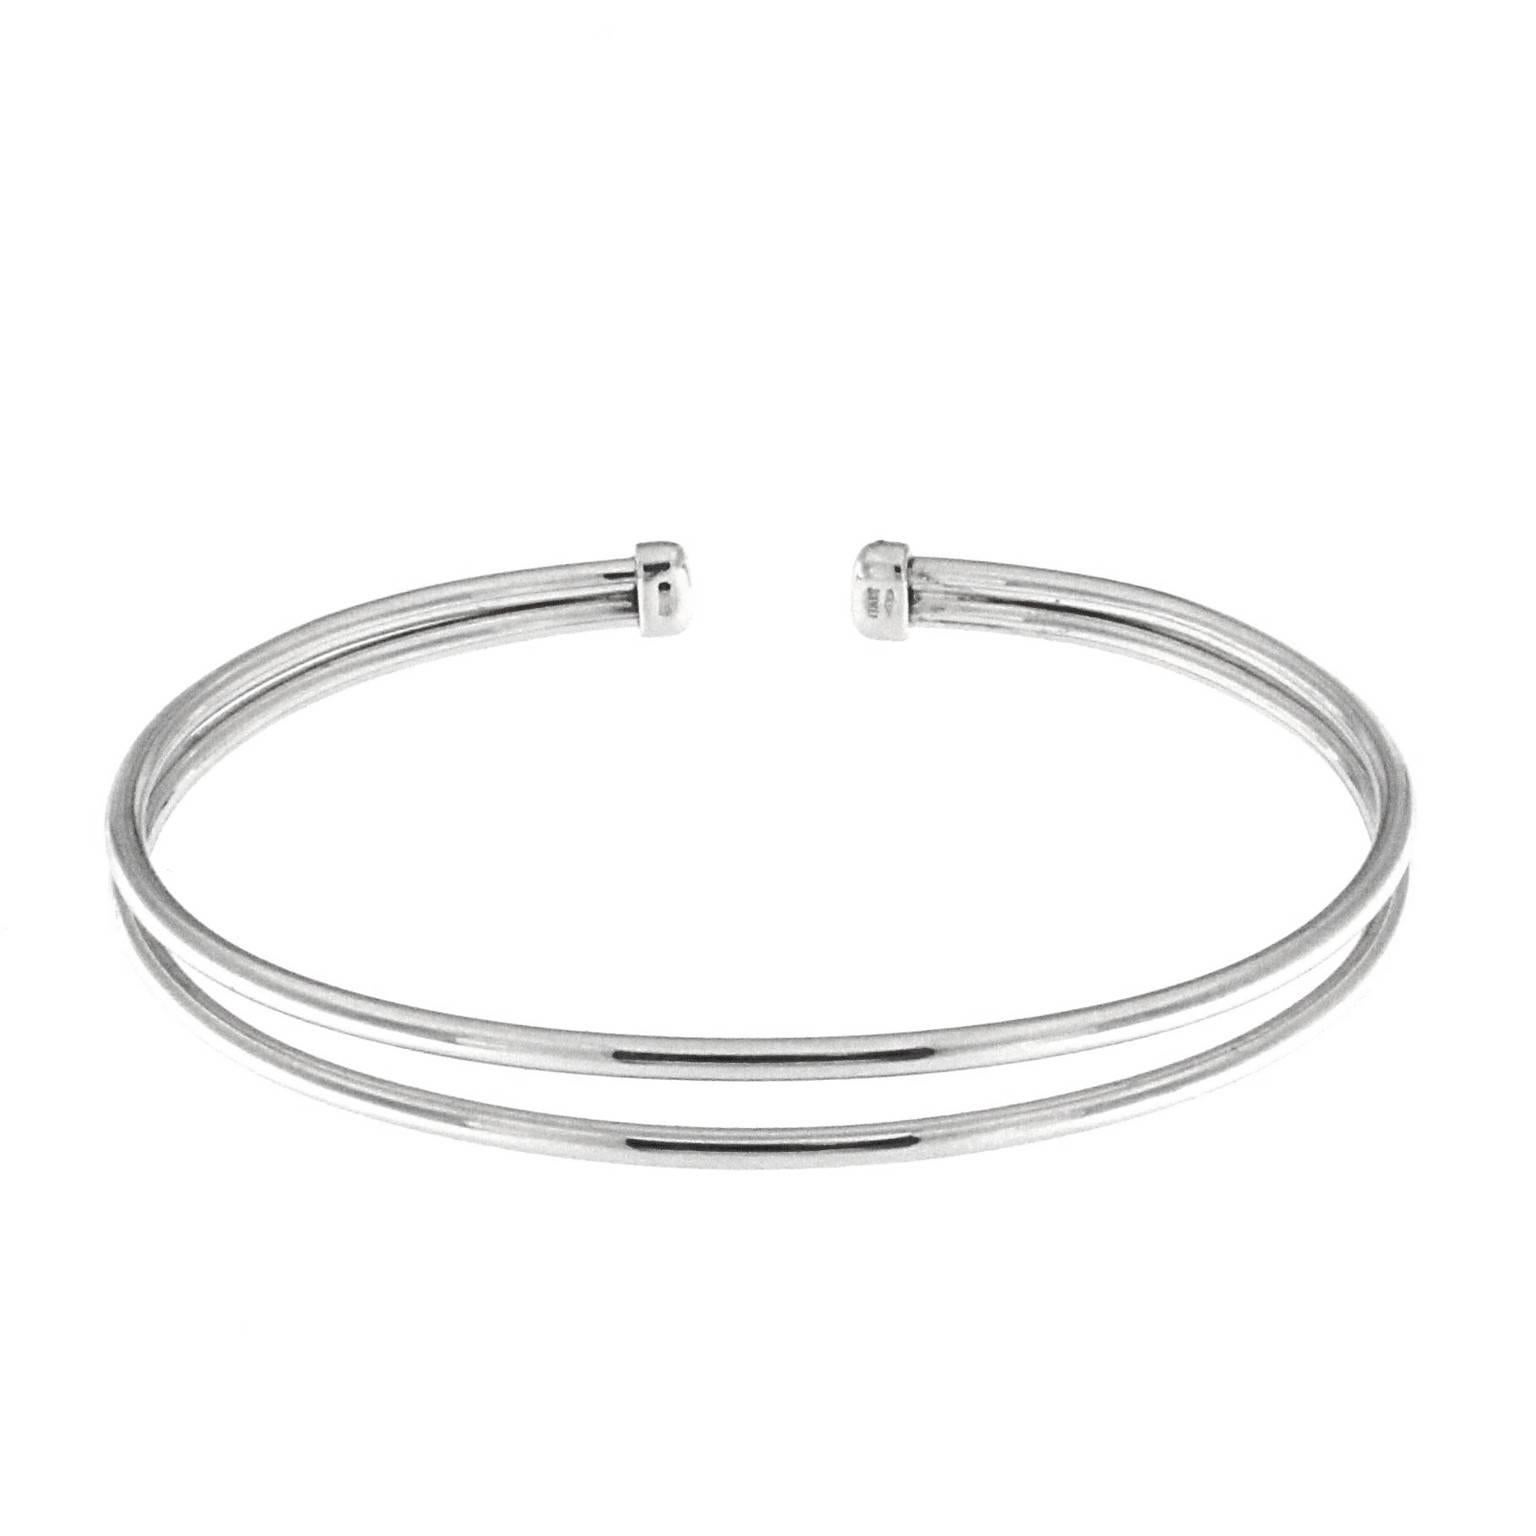 Rigid bracelet on oval shape made with 2 thin round canes to perfectly fit the anatomy of the woman's wrist.
This bracelet is part of the collection  Double MINIMAL
Made entirely of white gold with the little ends  that make it very